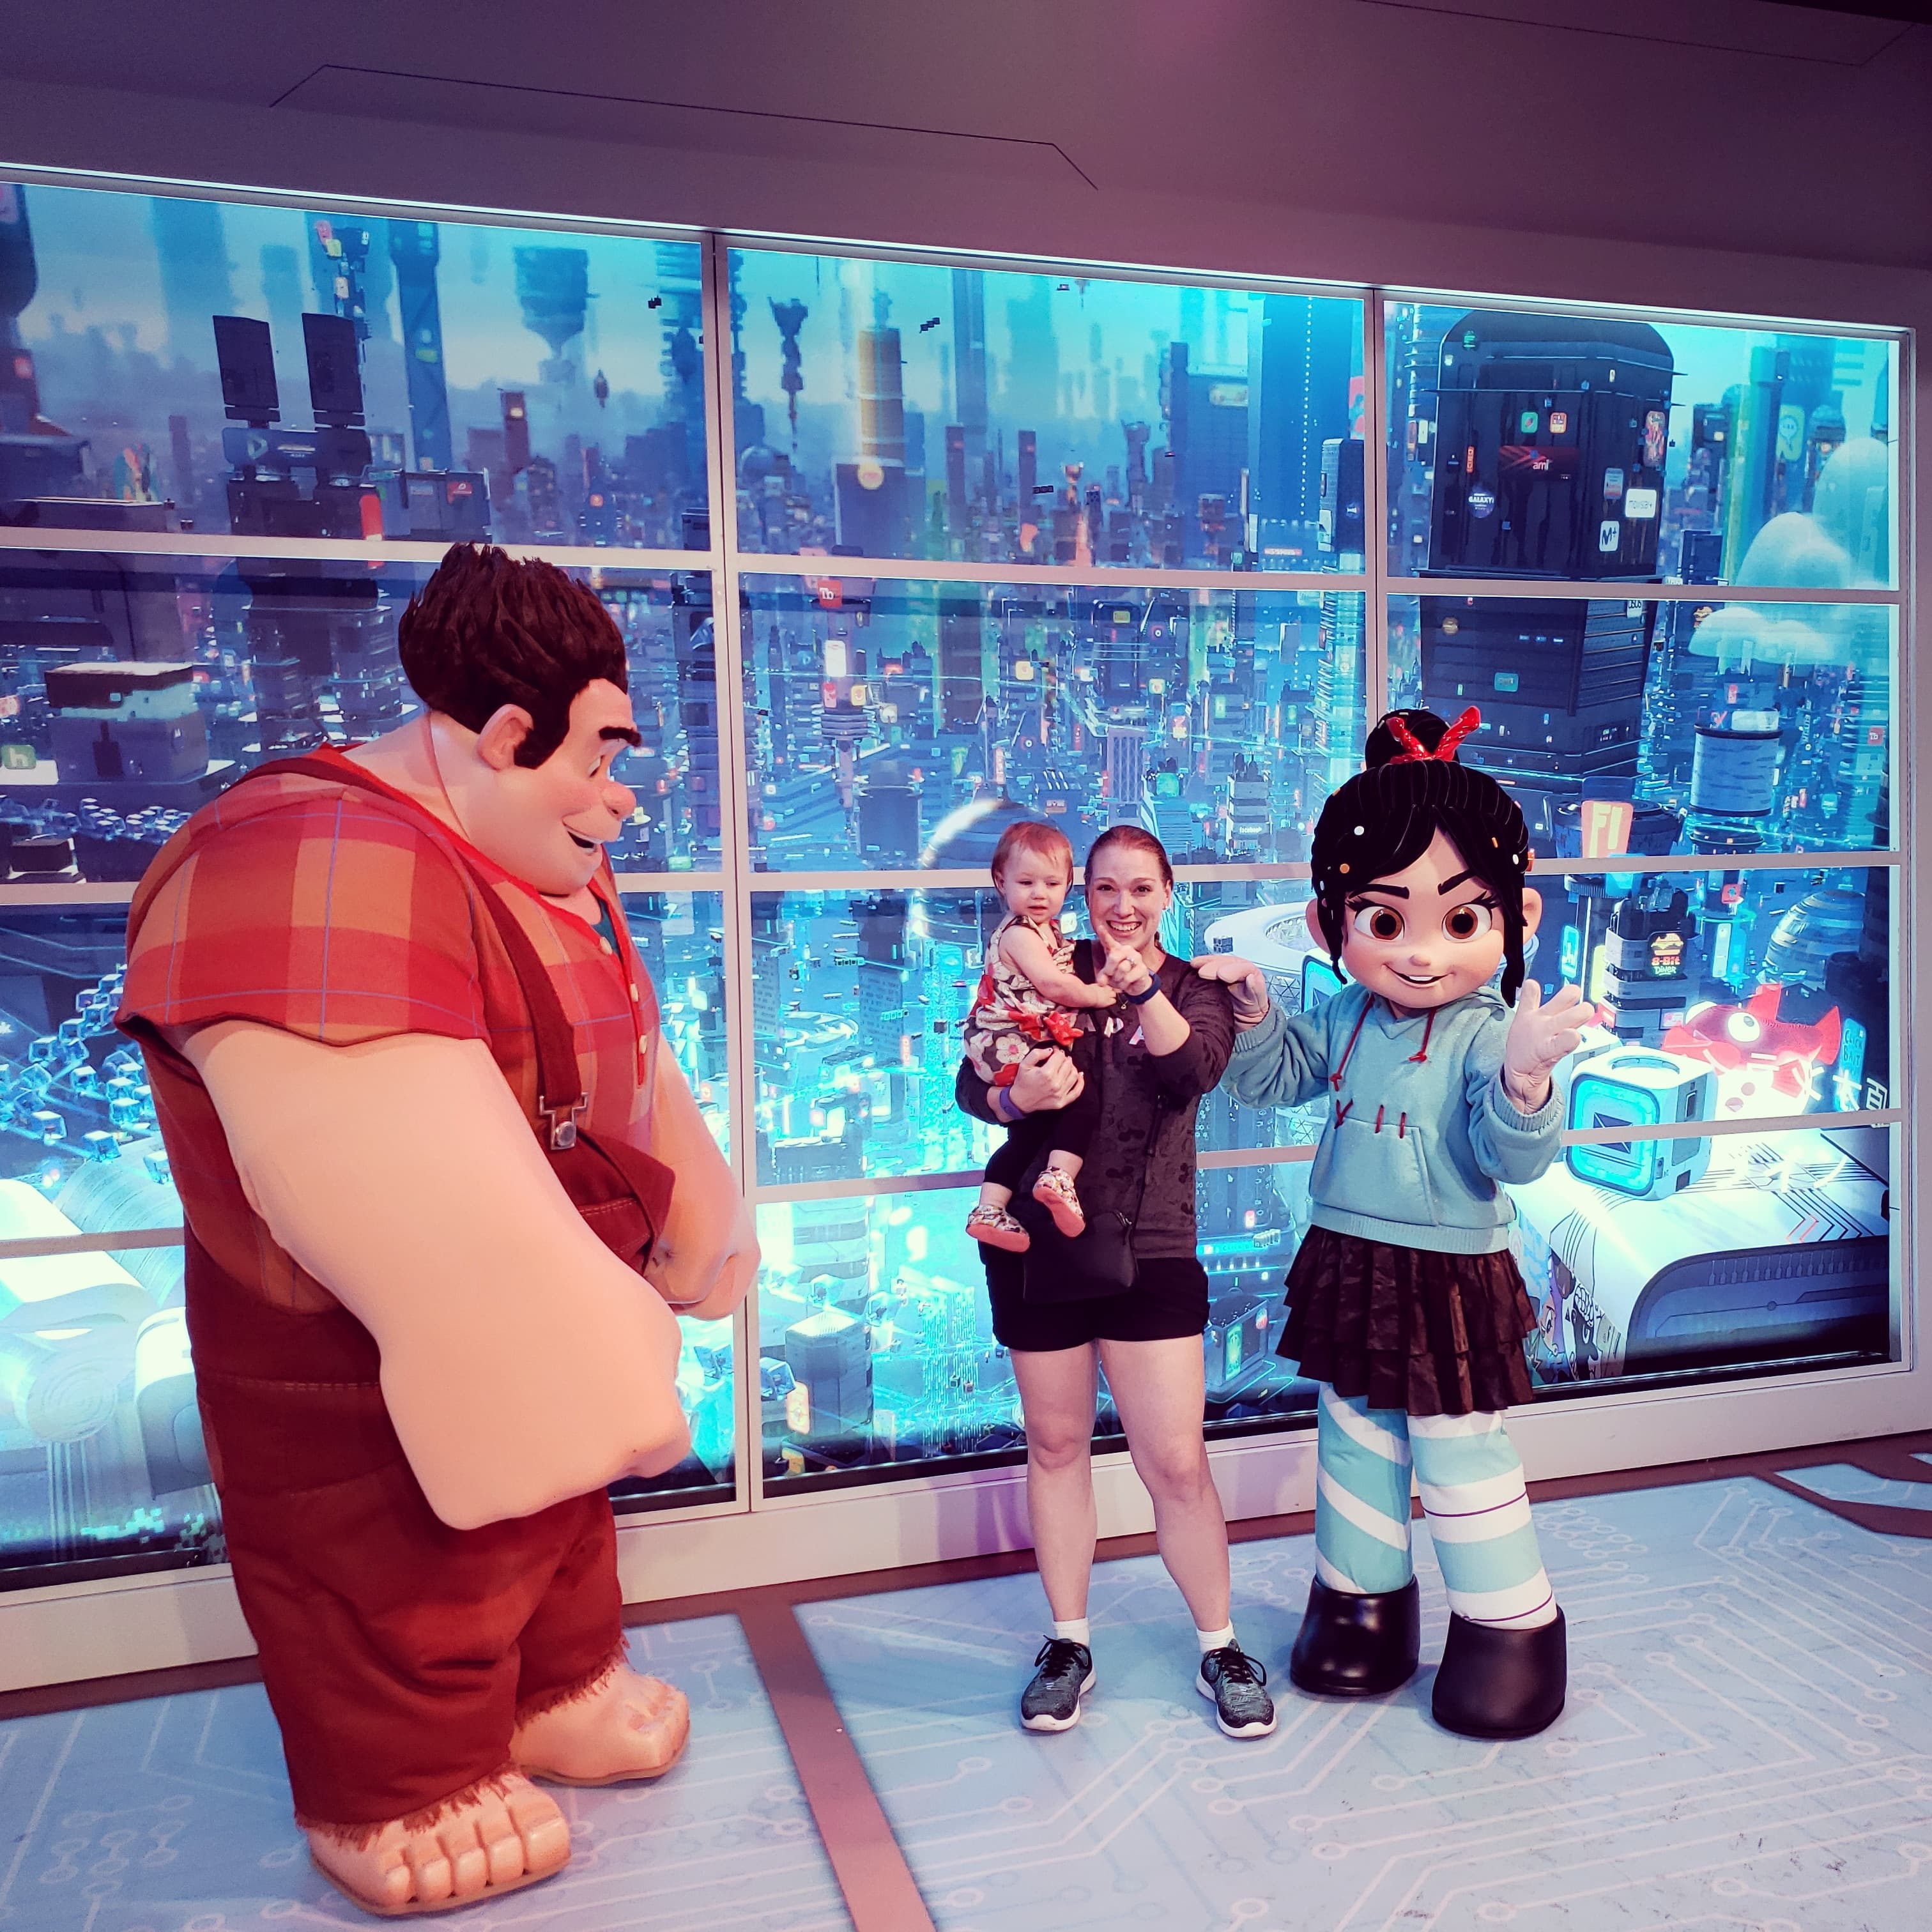 How Disney’s Movie “Ralph Breaks the Internet” Can Help Parents Teach Kids About the Internet